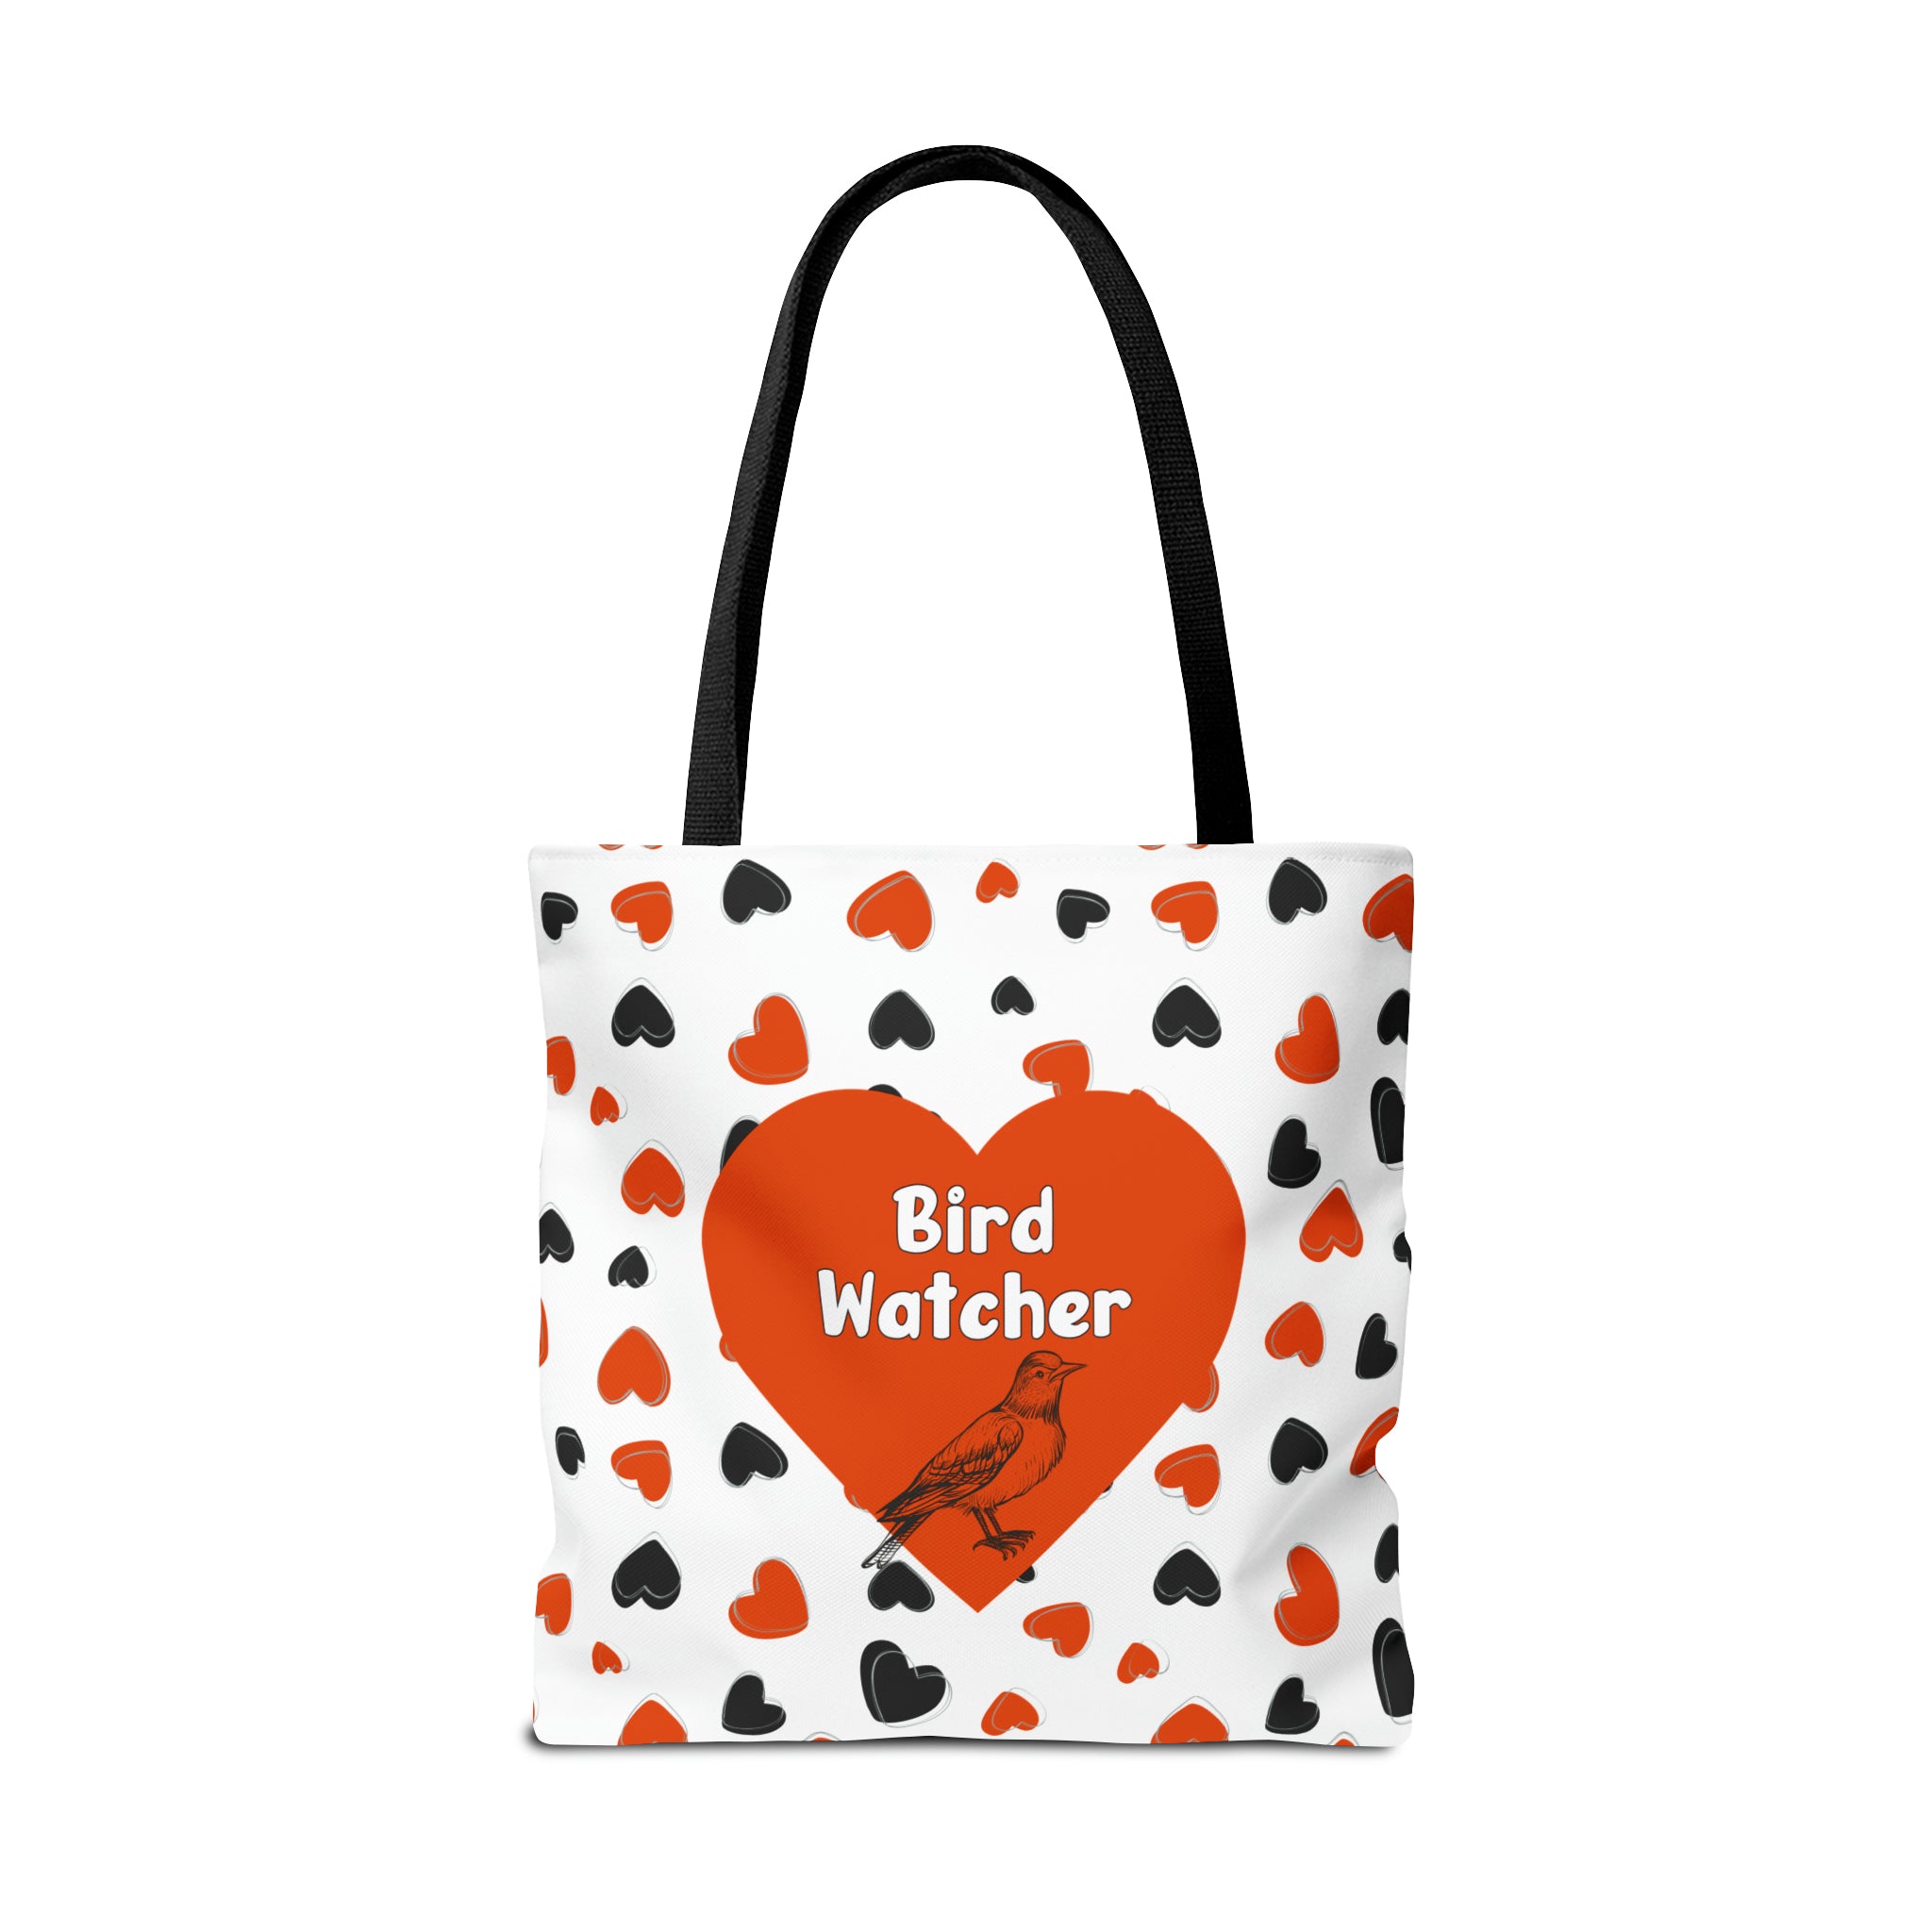 Bird Watcher Bag Heart Theme | Shopping Tote for Baltimore Sports Fans | Baltimore Valentine Gift